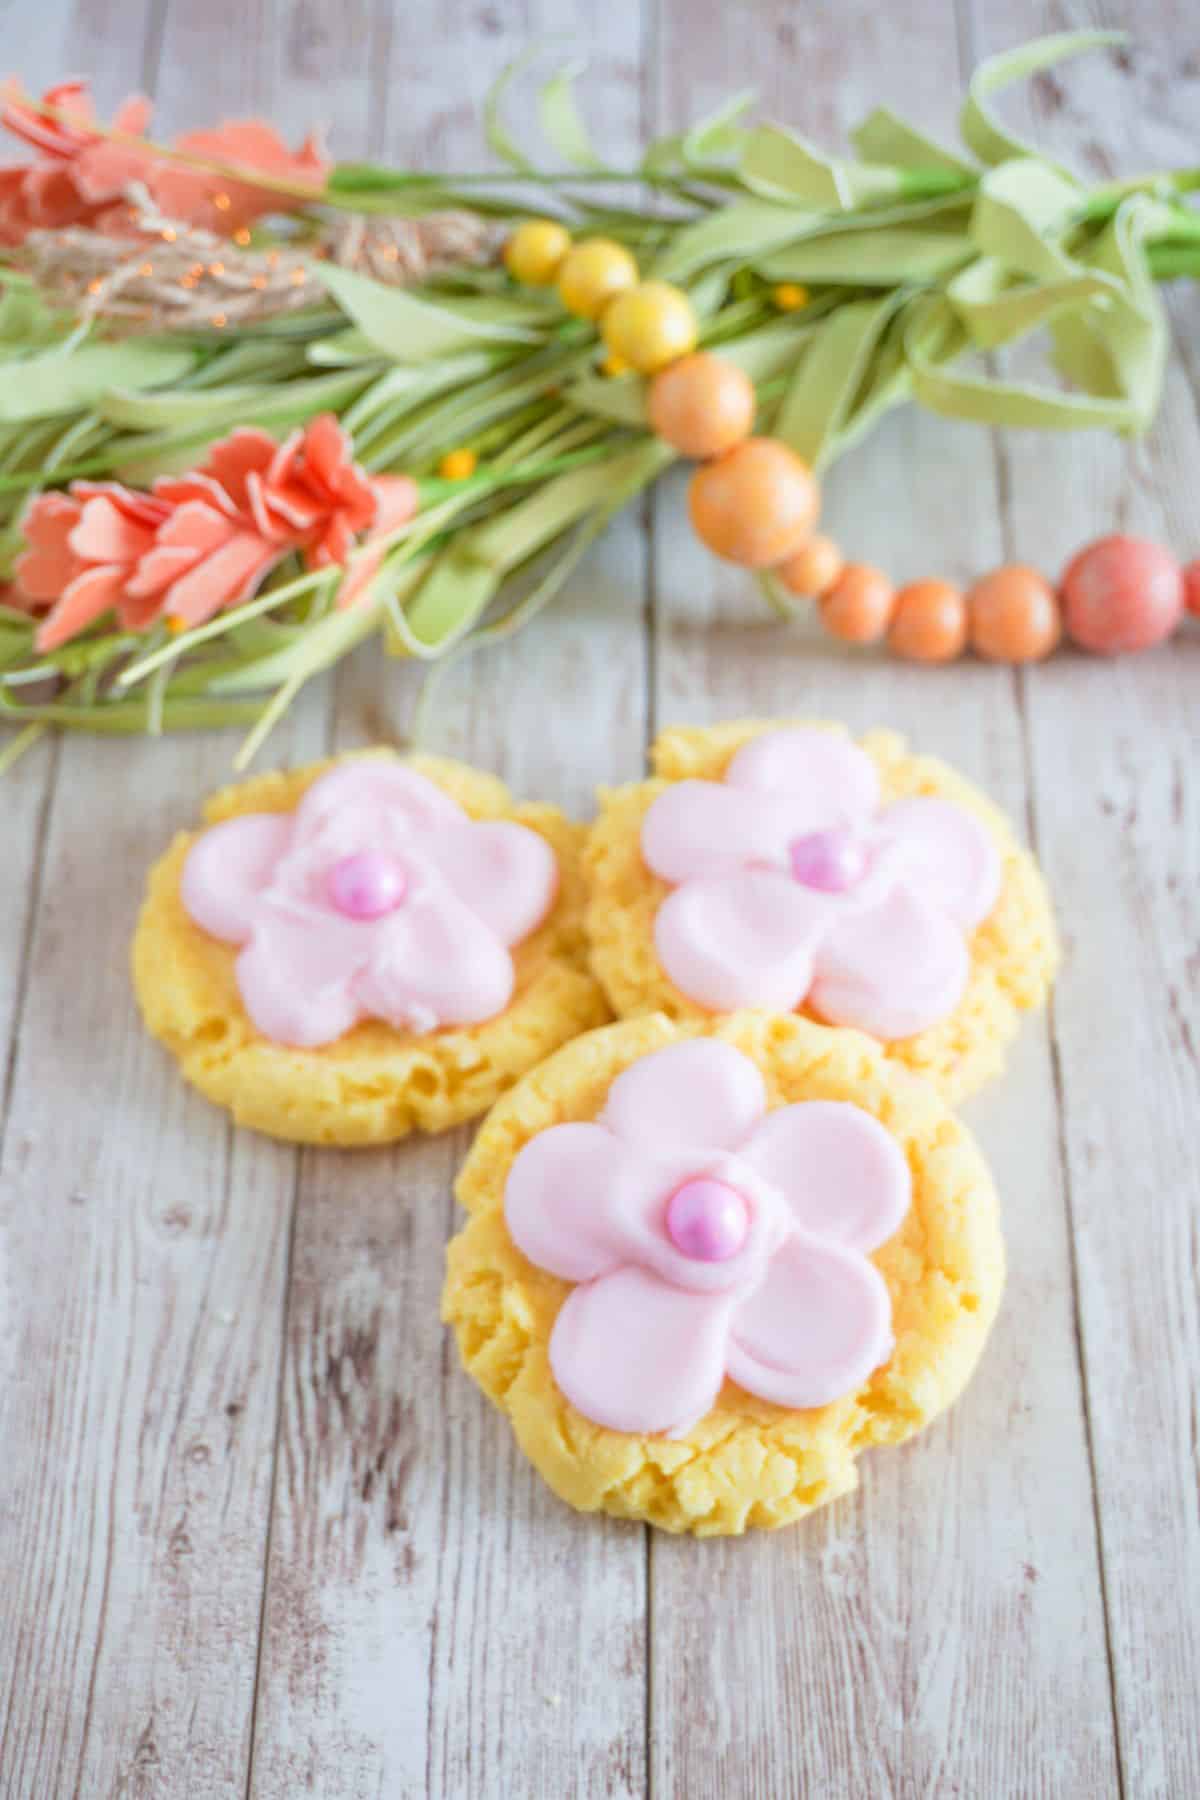 Lemon Cake Mix Cookies With Frosting made to look like a flower next to some greenery and beads